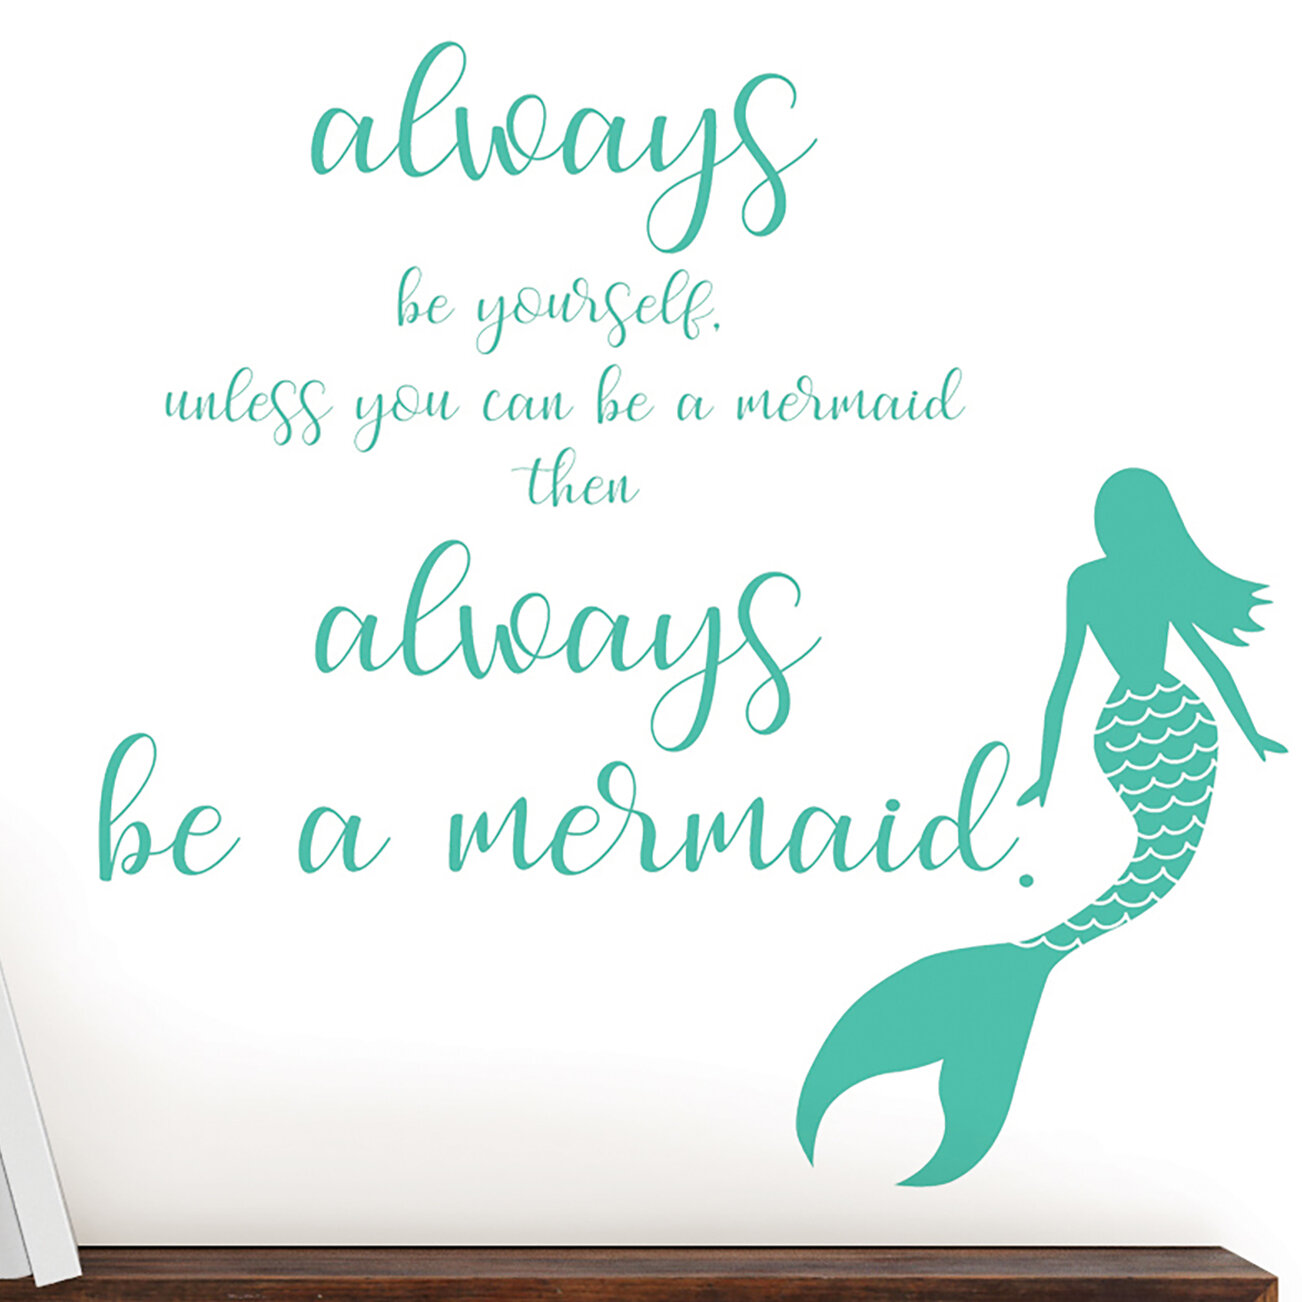 little mermaid quote facebook covers